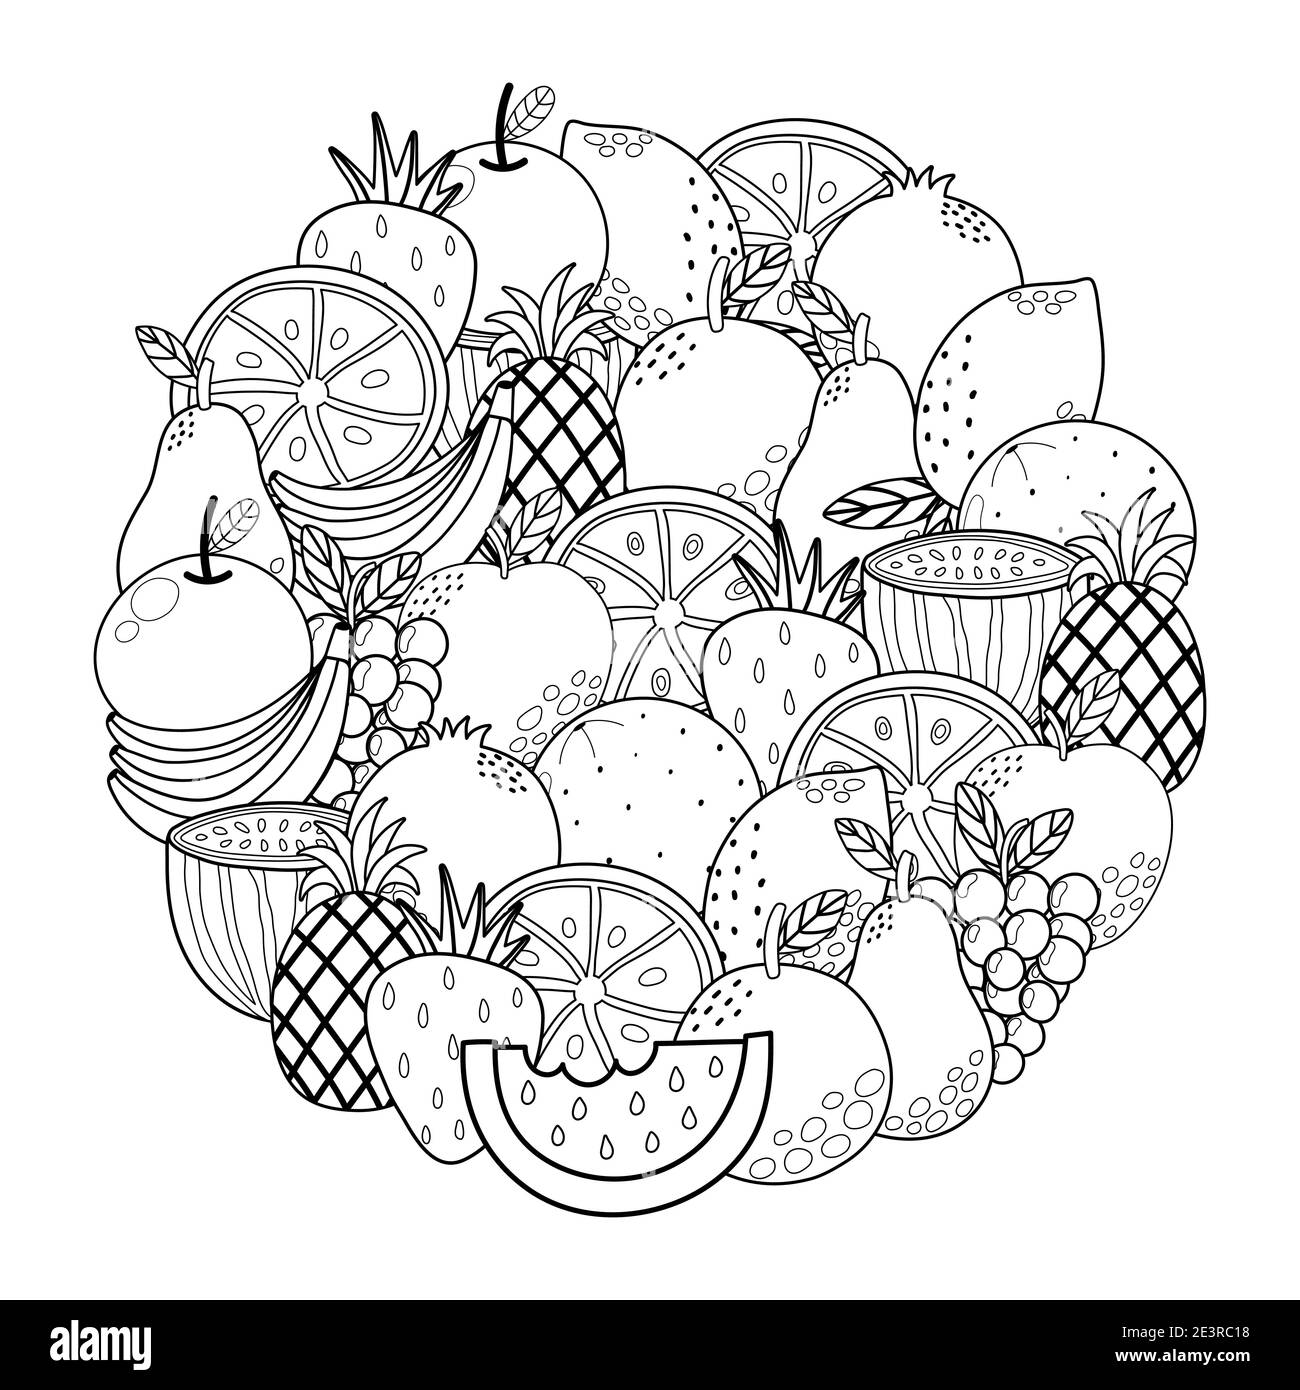 Circle shape coloring page with fruits. Black and white outline ...